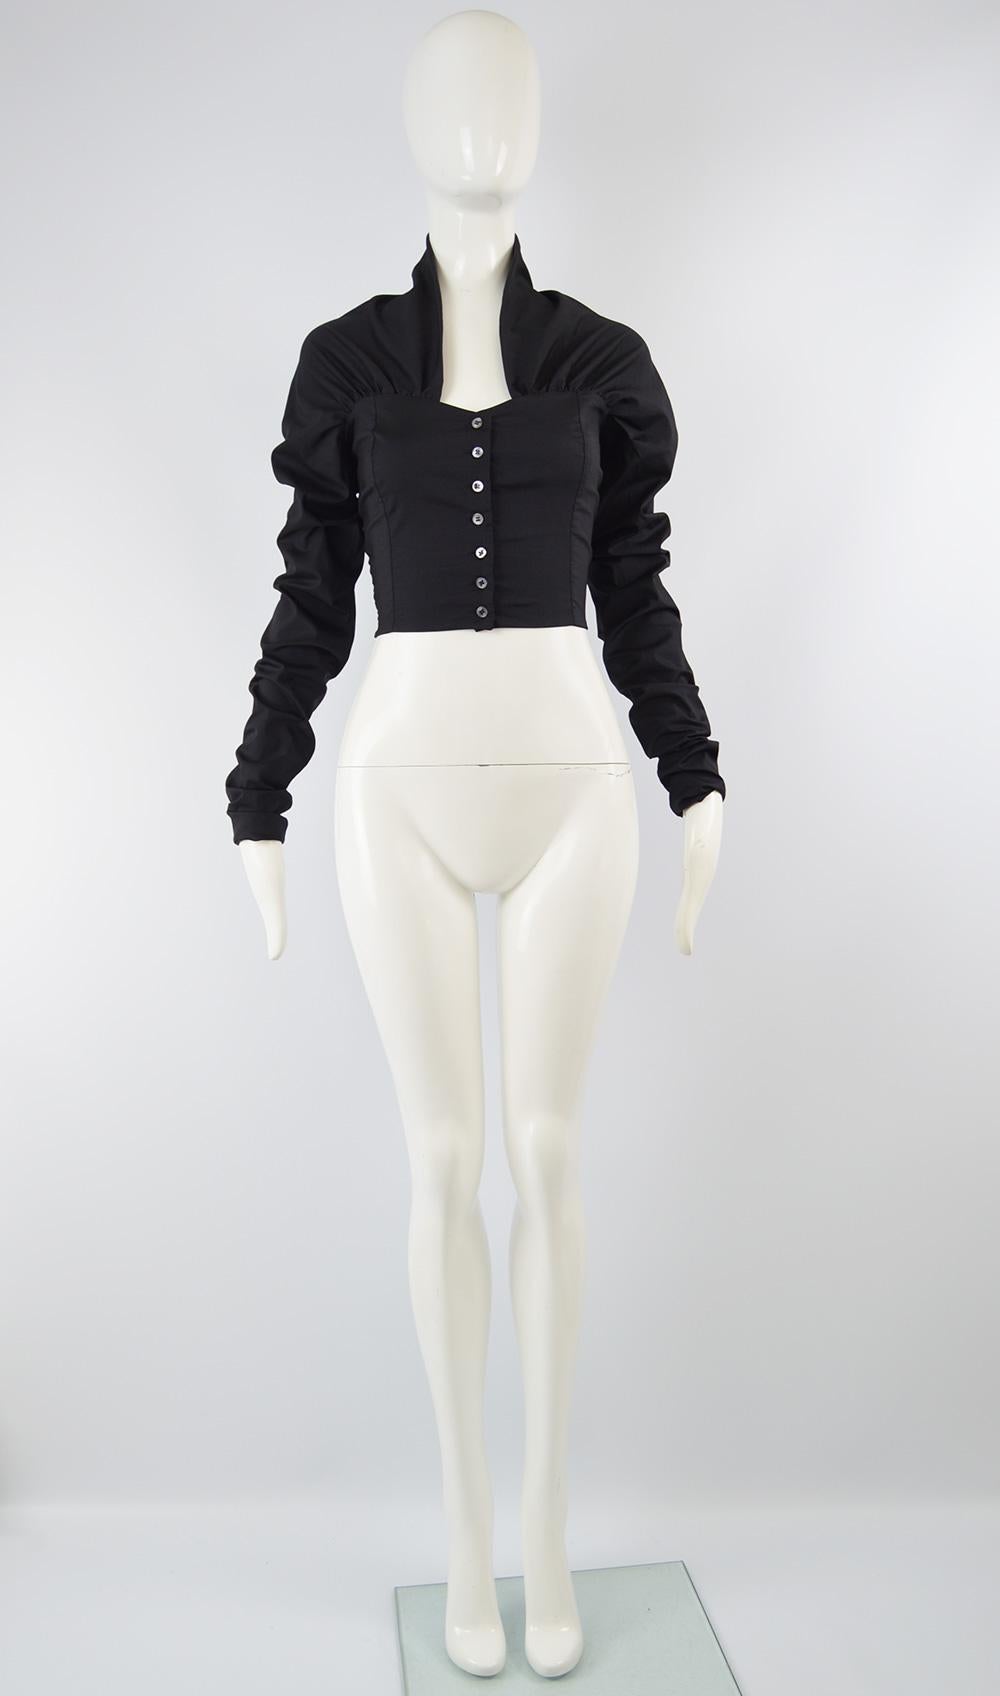 An incredible avant garde women's blouse from the 90s by Dolce & Gabbana. In a black stretch silk and lycra blend, the sleeves are extra long and bunch up to create a ruched effect. The back has a stand up collar almost like a half shawl collar,